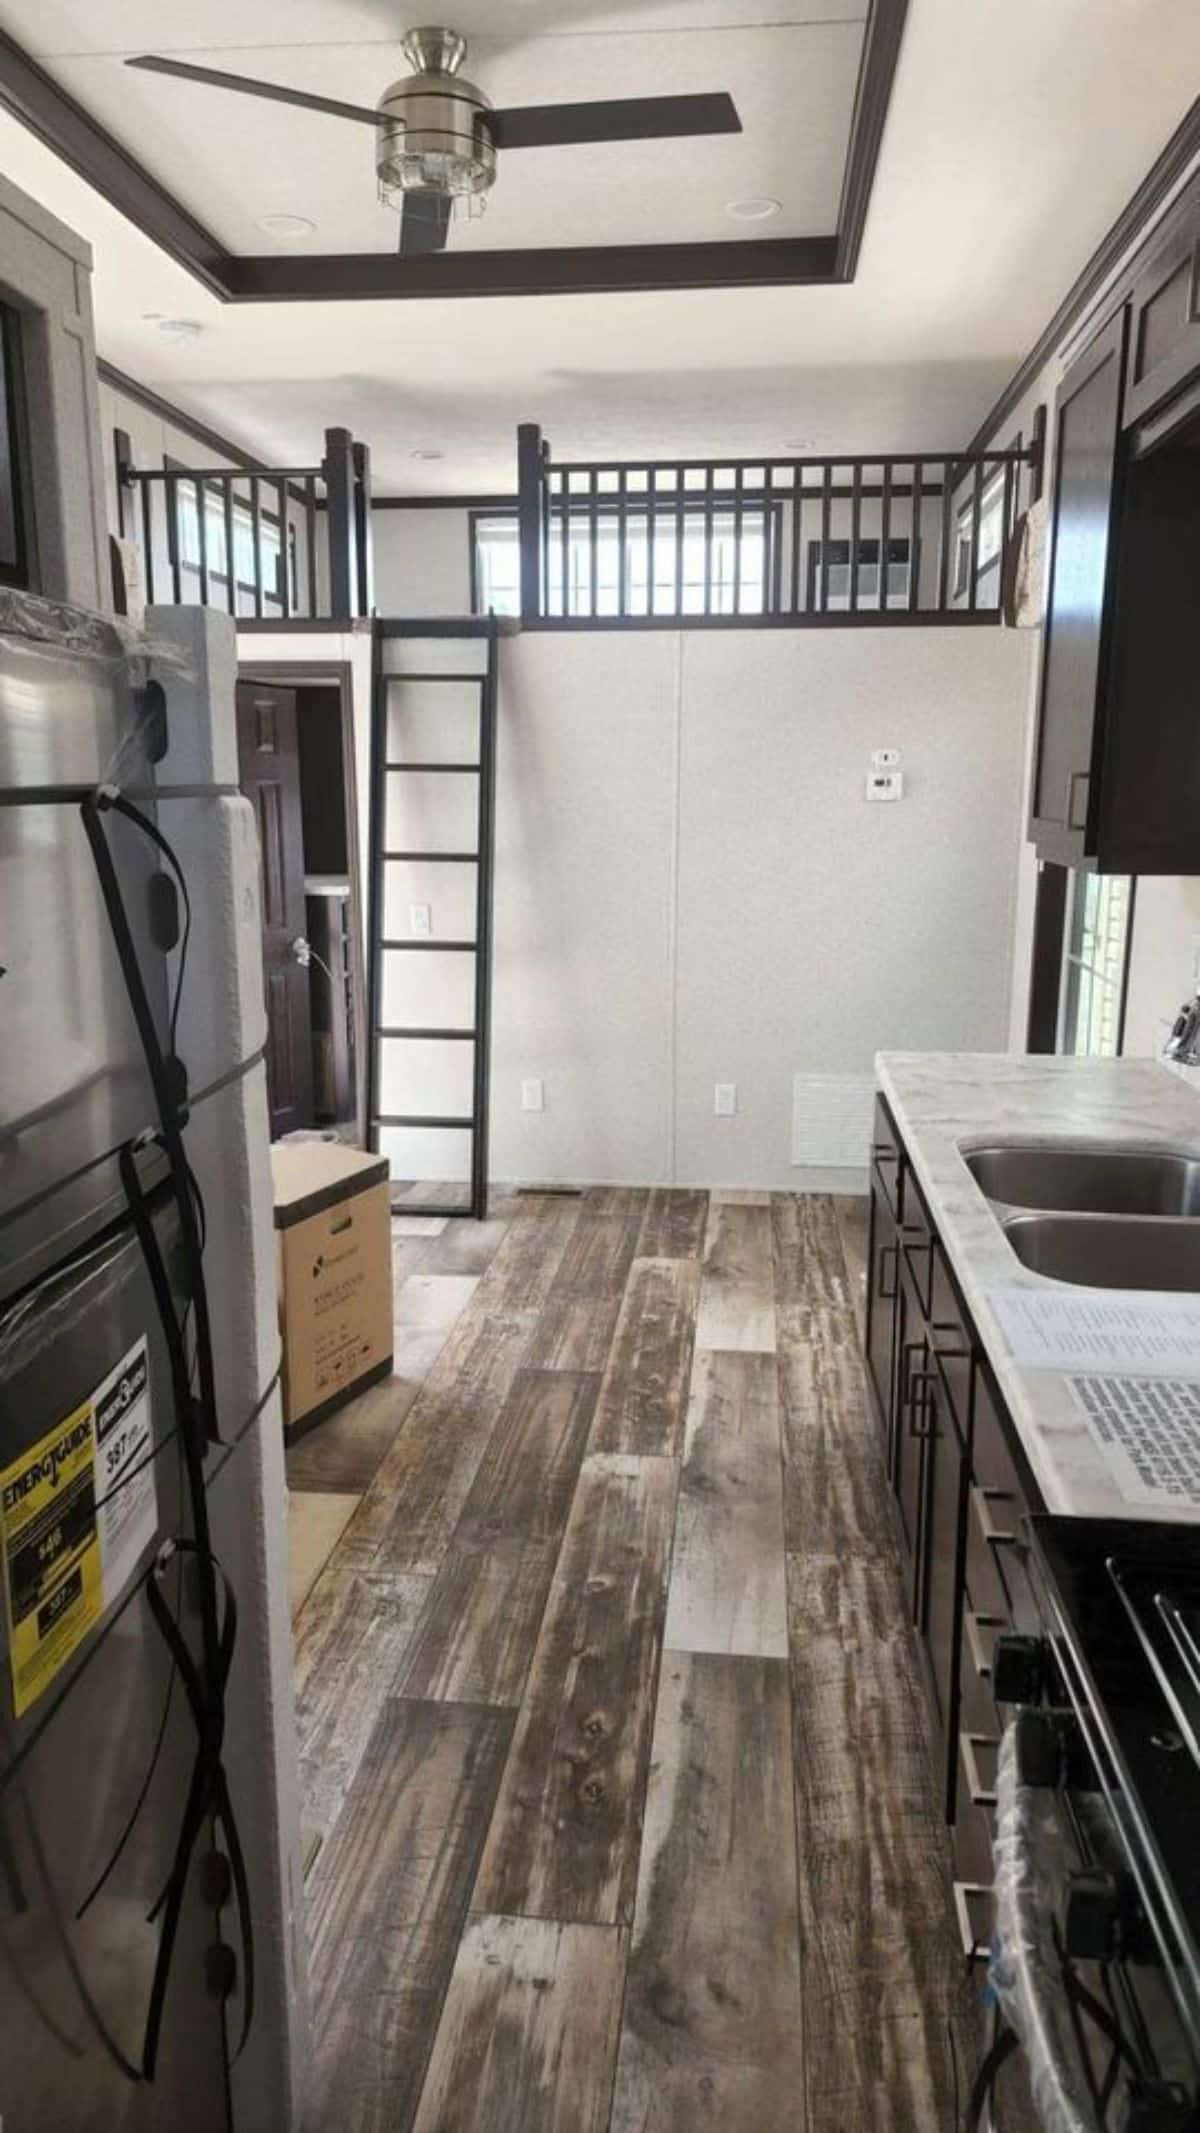 Living area of two bedroom tiny home